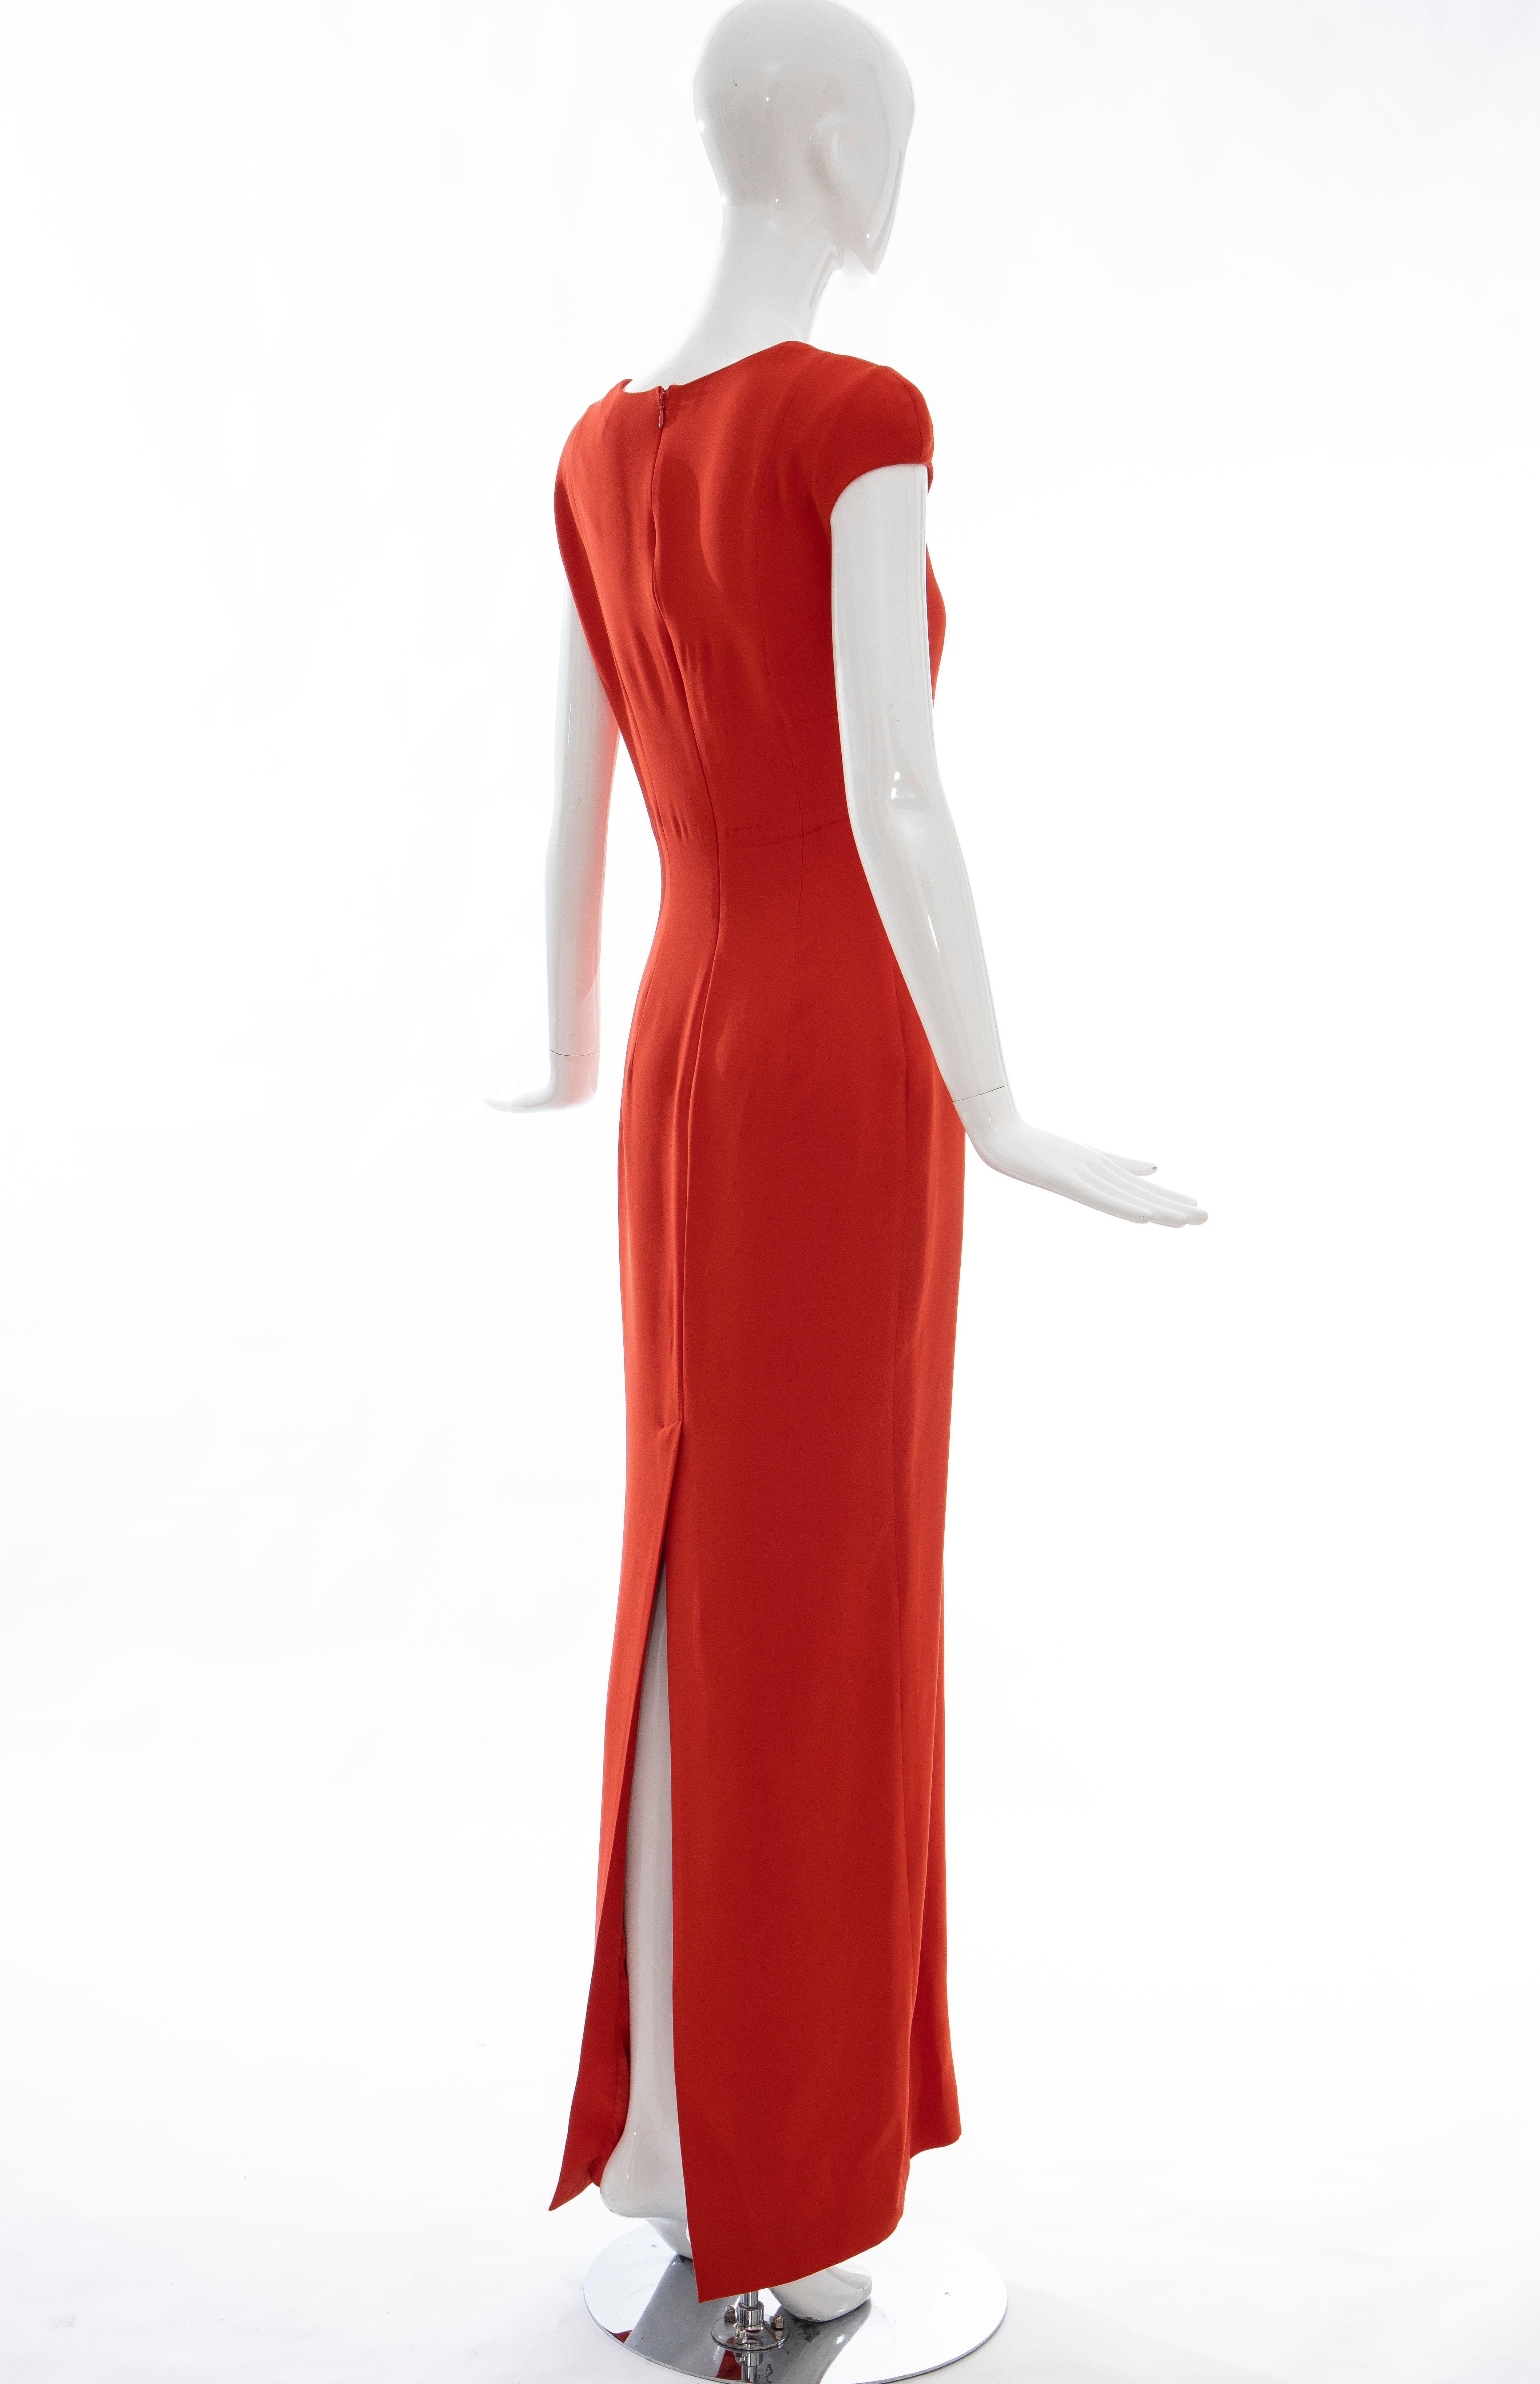 Tom Ford Runway Silk Persimmon Evening Dress With Cape, Fall 2012 9